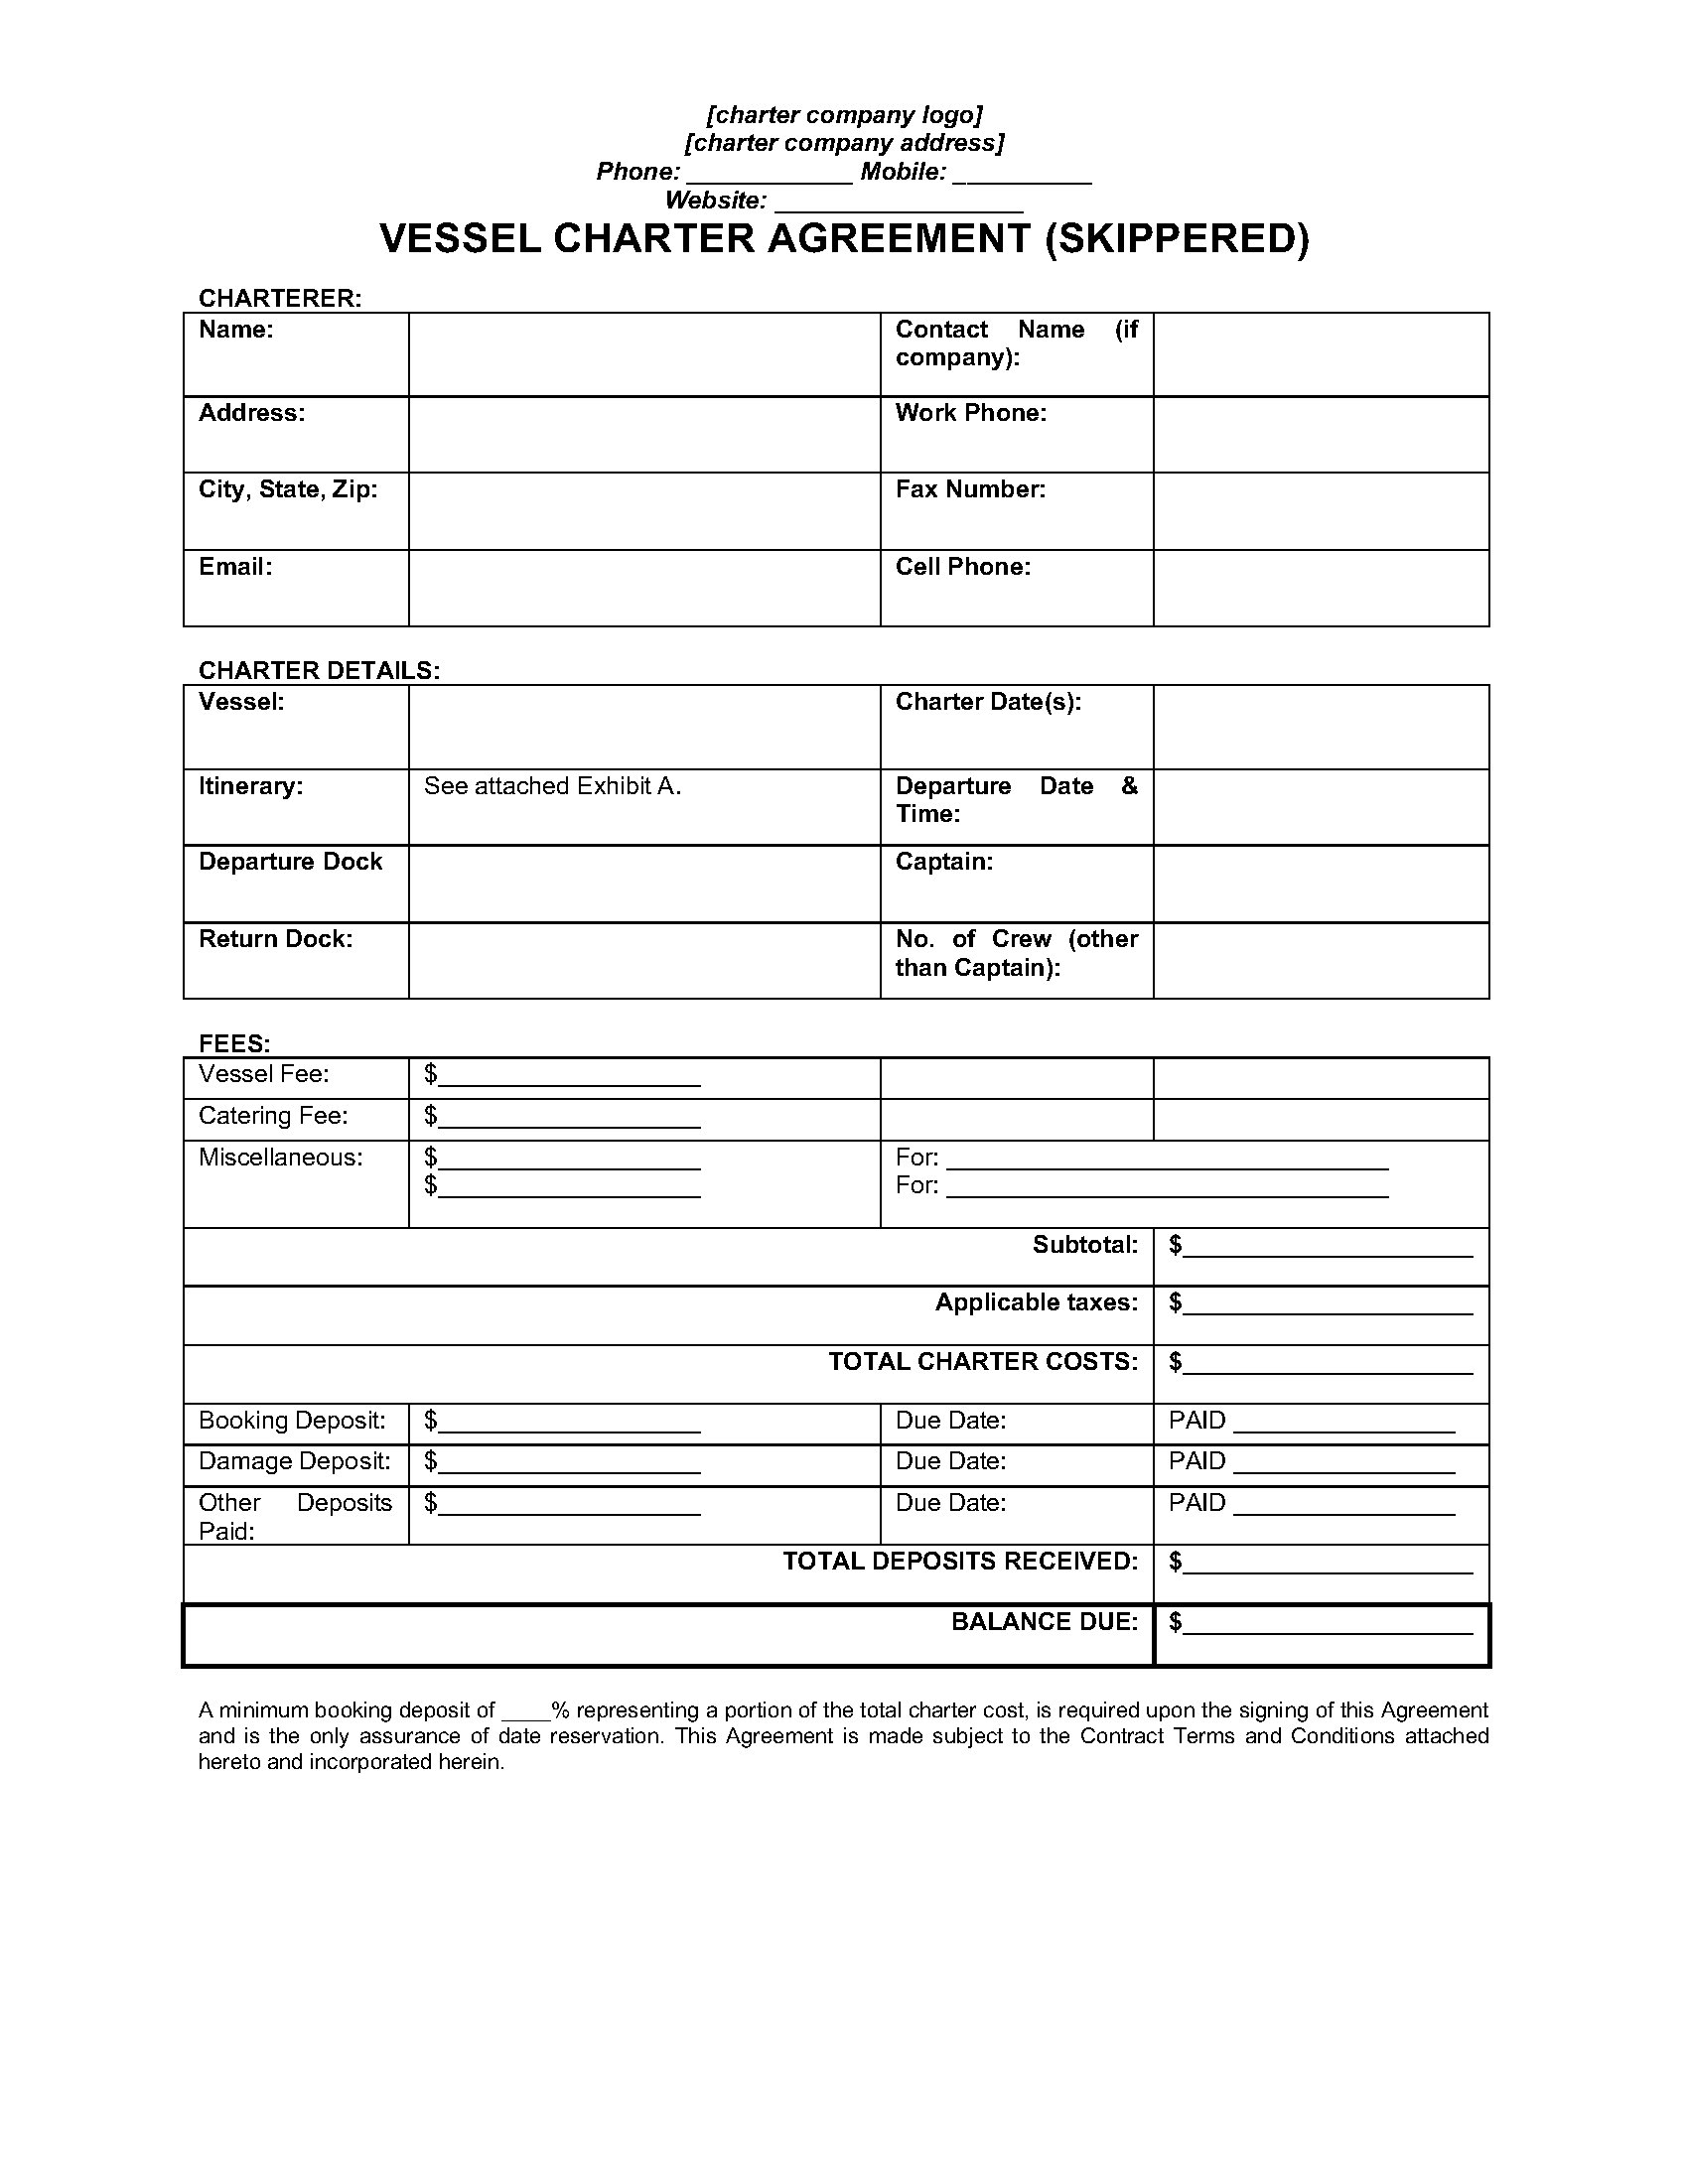 California Skippered Vessel Charter Agreement  Legal Forms and Intended For yacht charter agreement template